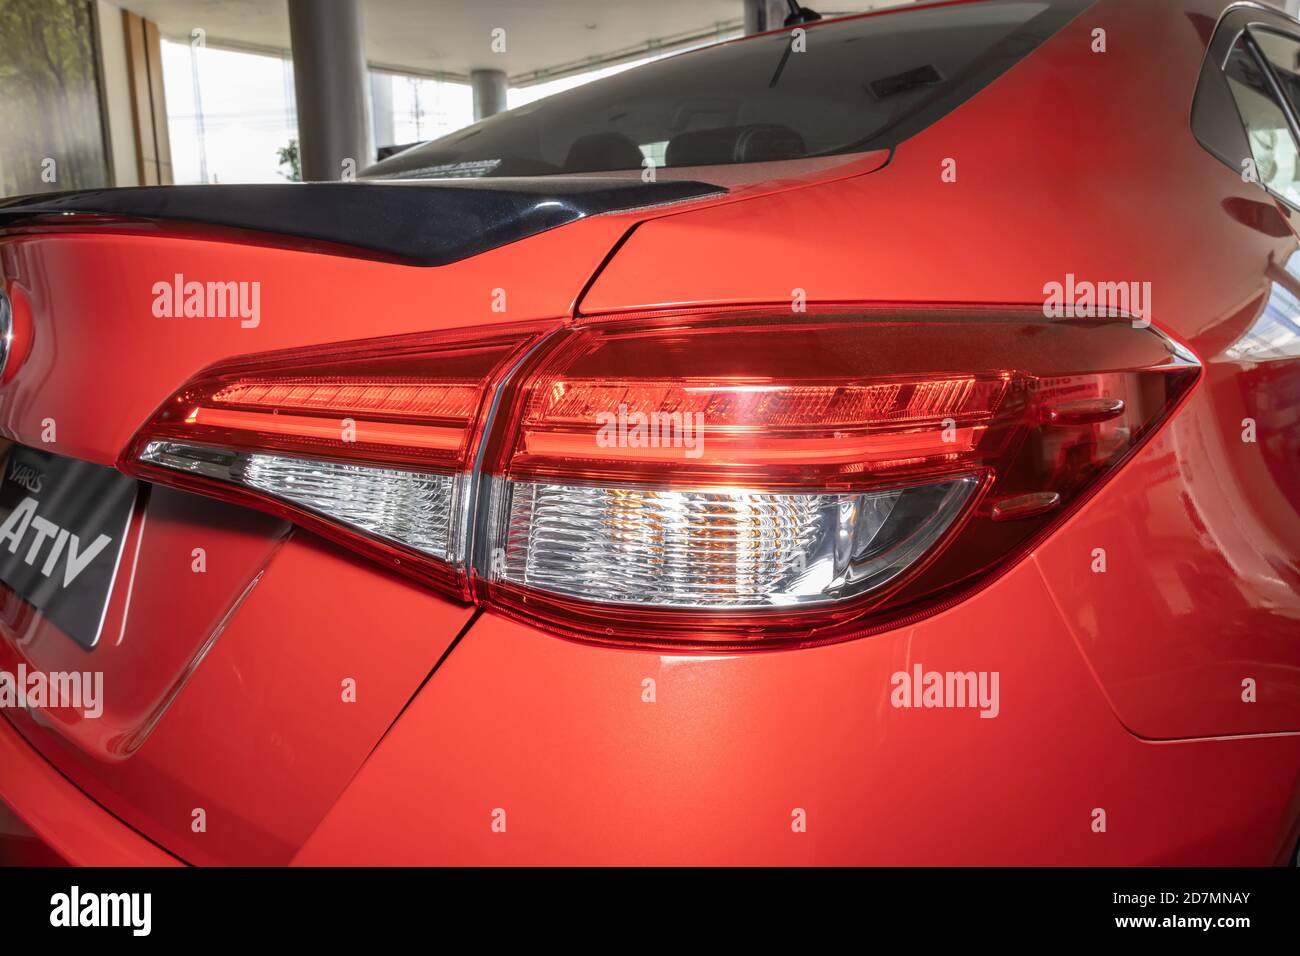 Phayao, Thailand - Sep 13, 2020: Right Taillight or Tail Lamp of Red Toyota Yaris Ativ 2020 in Toyota Car Dealership Showroom Stock Photo